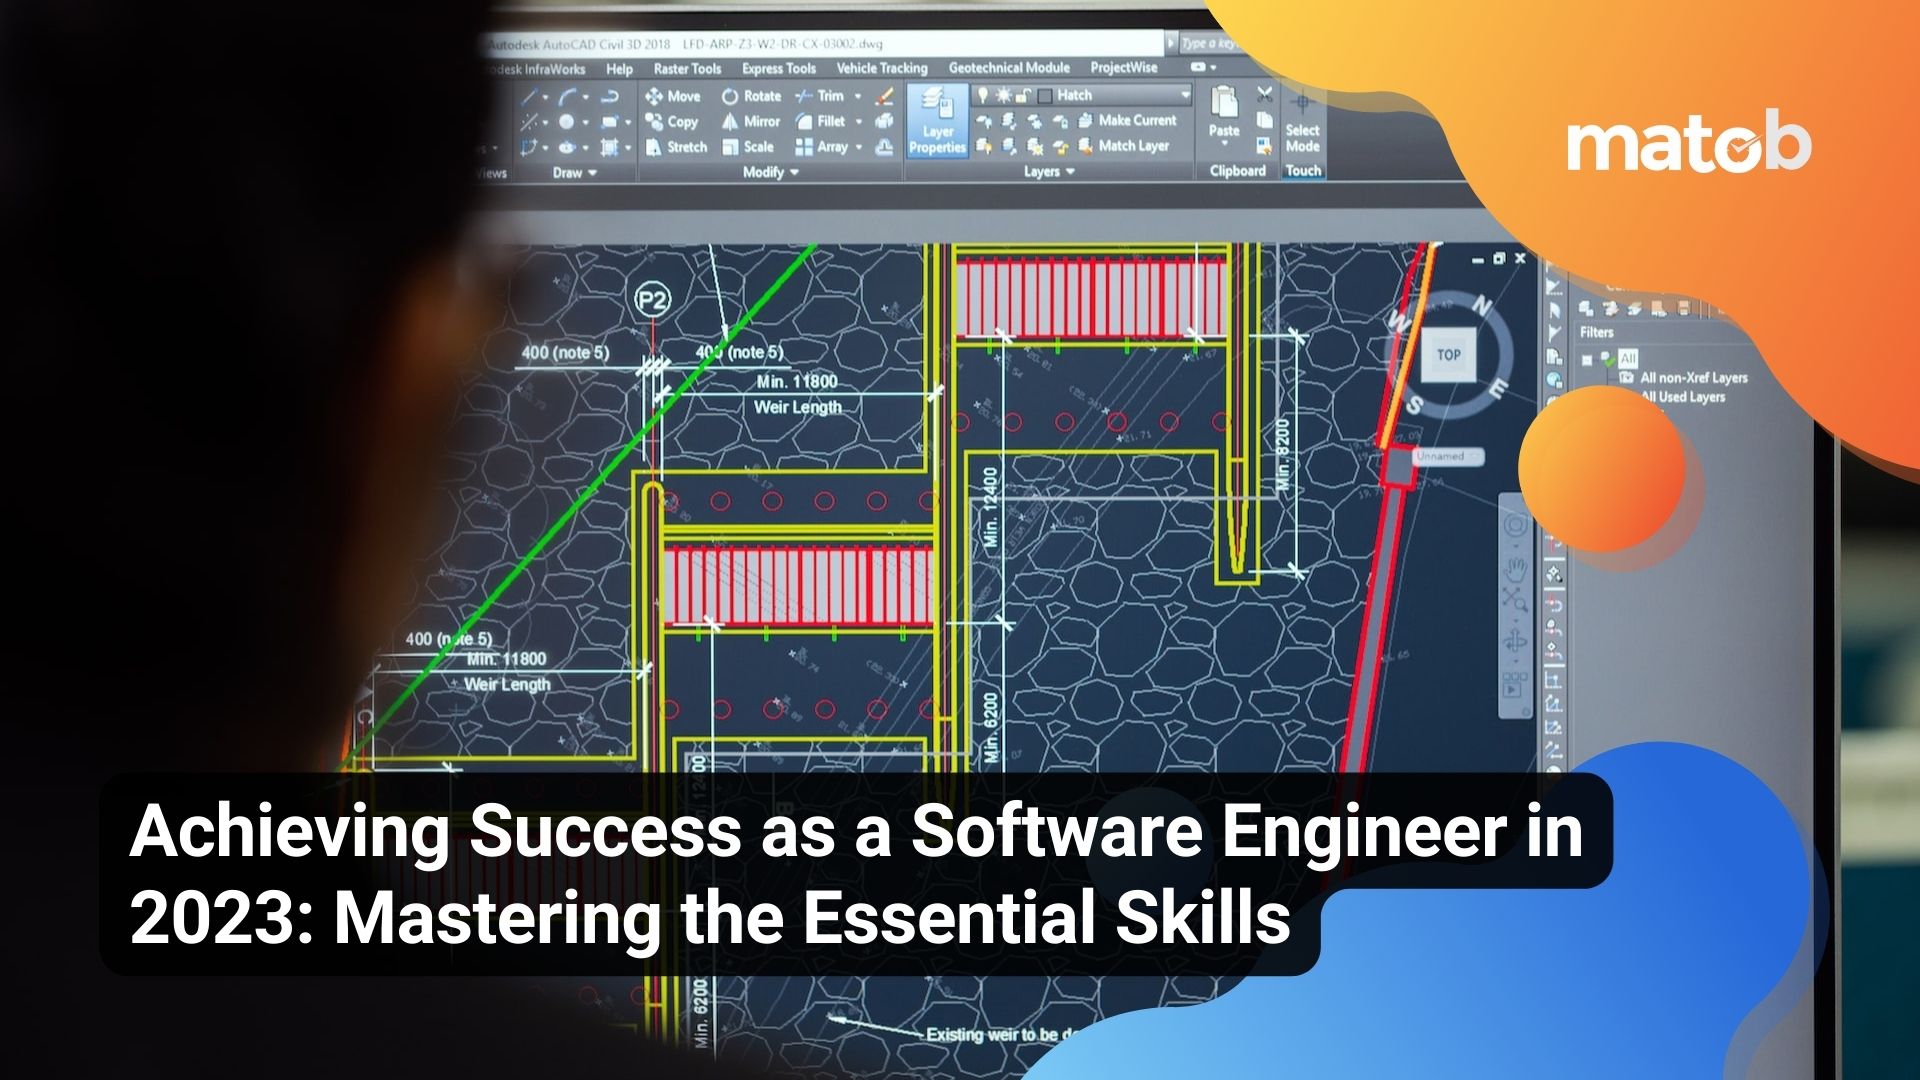 Achieving Success as a Software Engineer in 2023: Mastering the Essential Skills